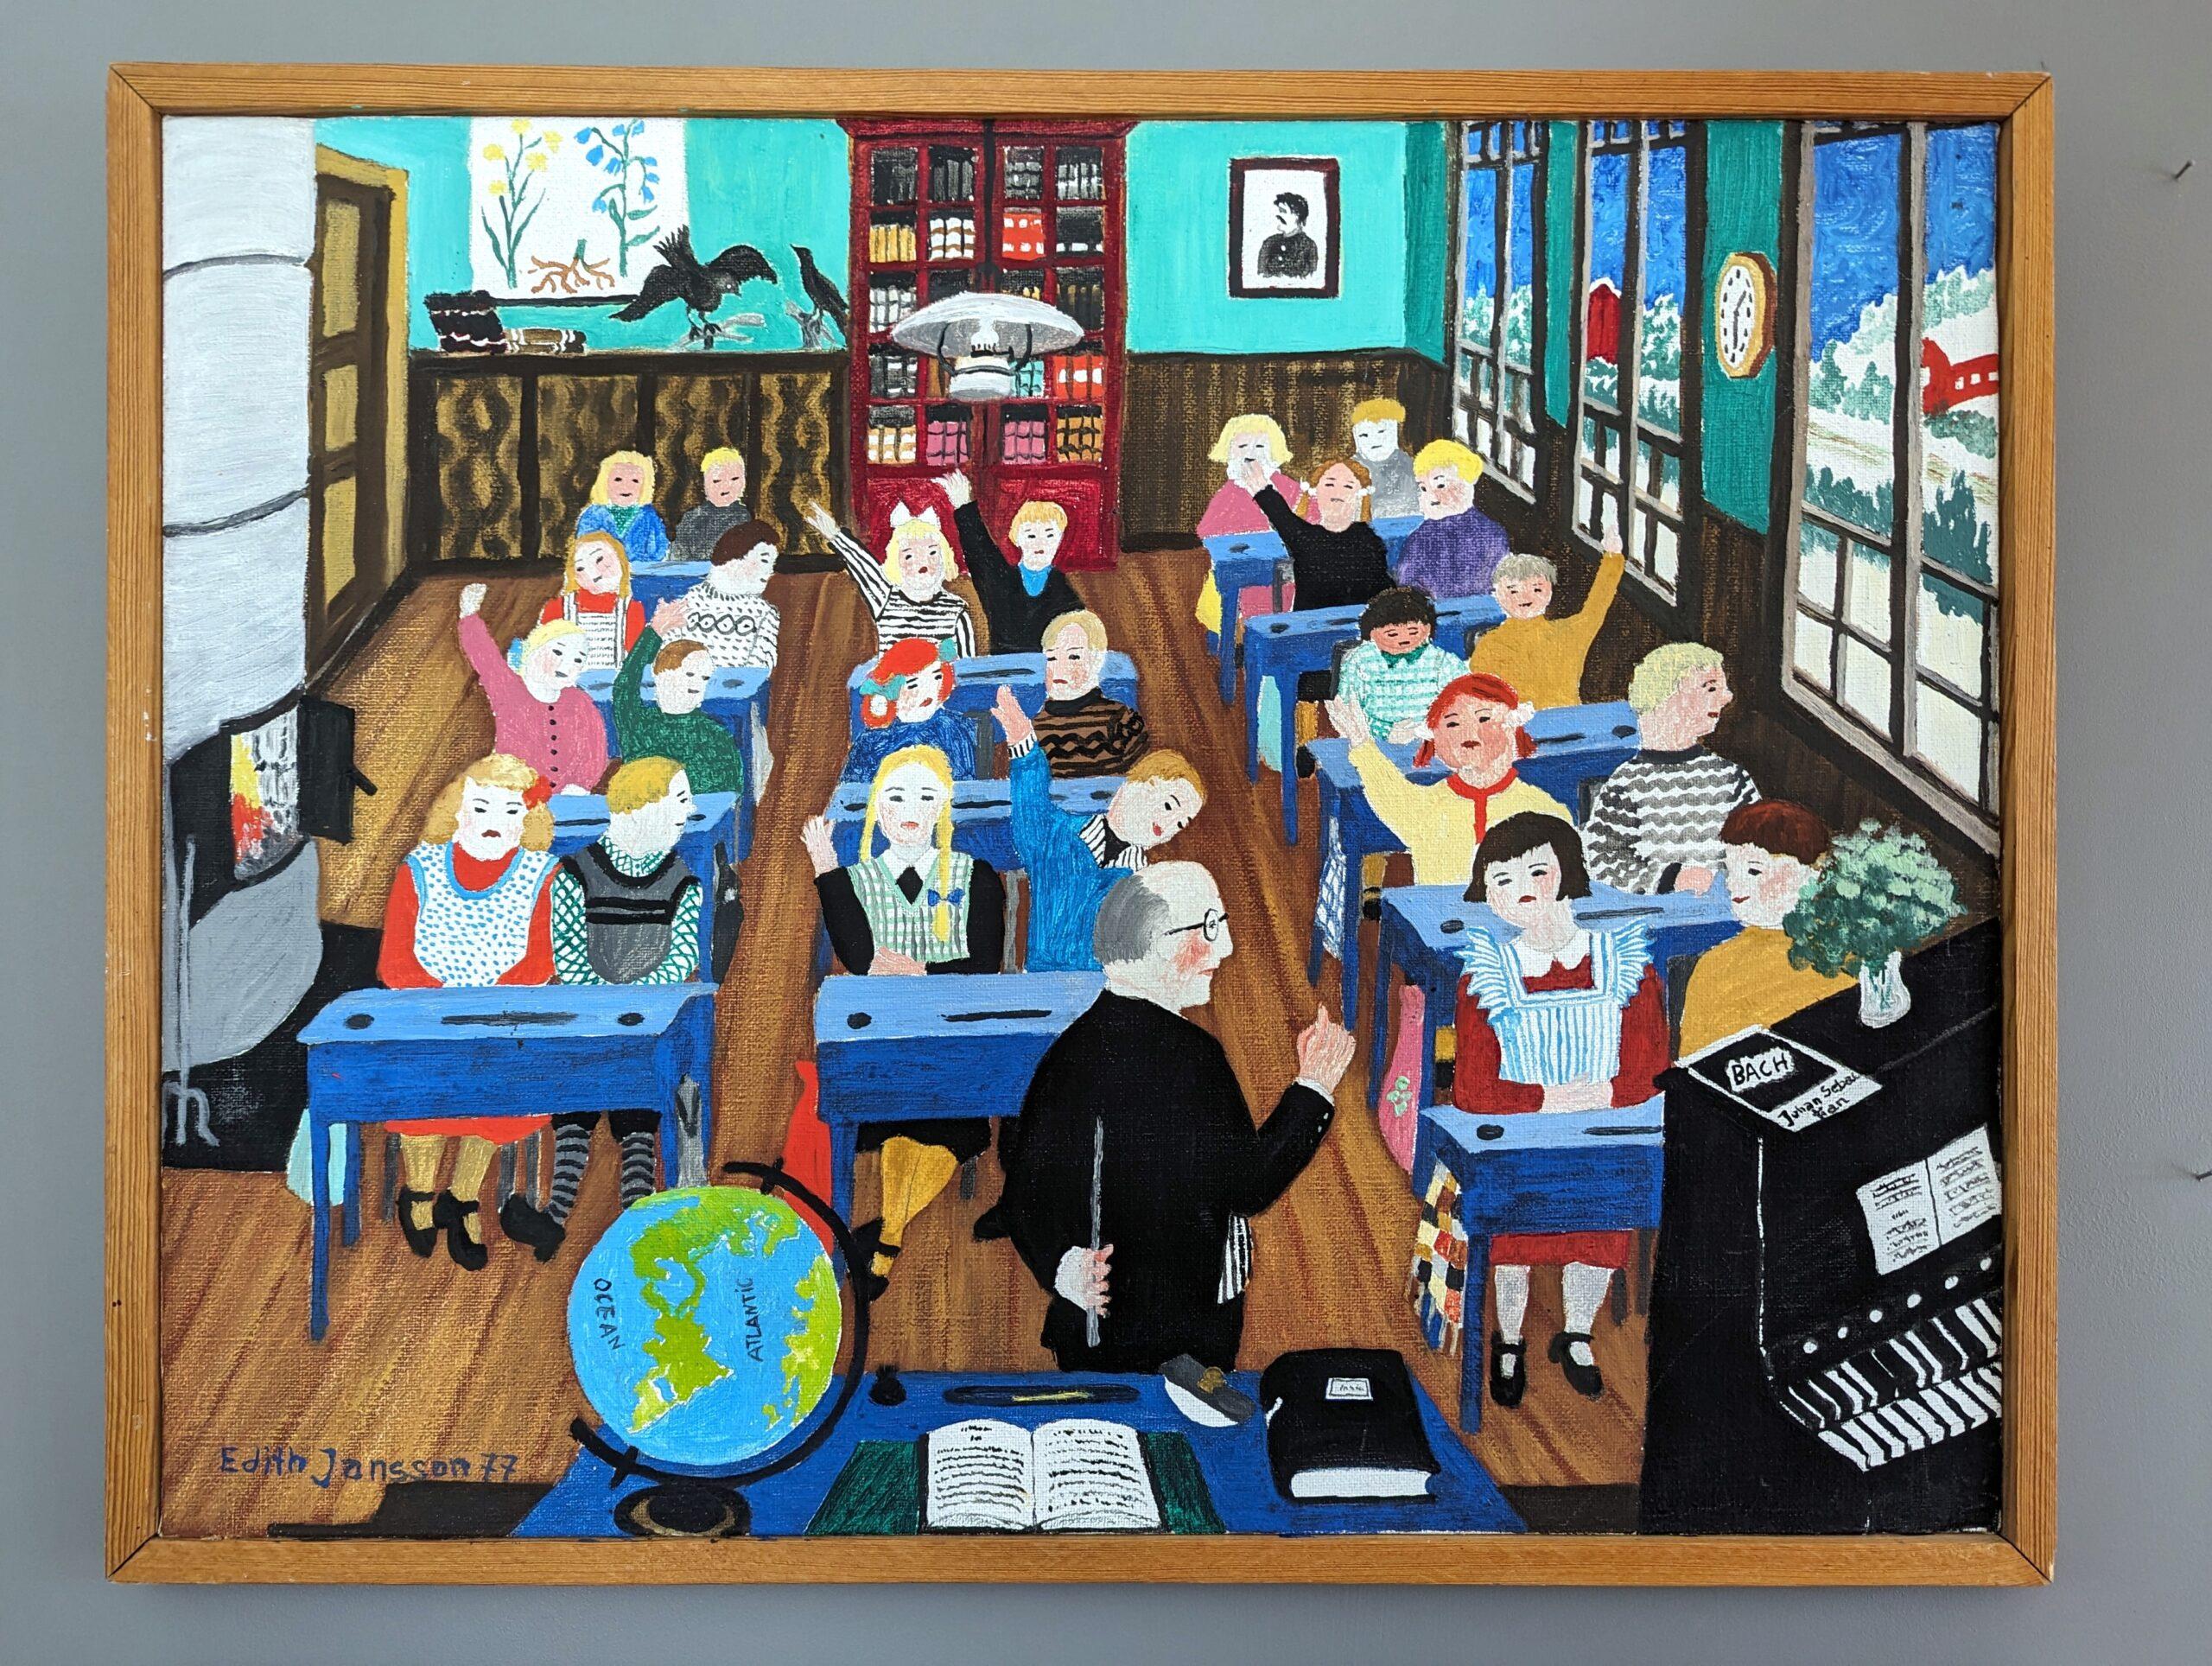 THE CLASSROOM
Size: 53 x 68 cm (including frame)
Oil on Canvas 

A fun and richly detailed composition in oil, painted onto canvas and dated 1977.

This playful oil painting depicts a classroom scene, with several details to explore. The artist has